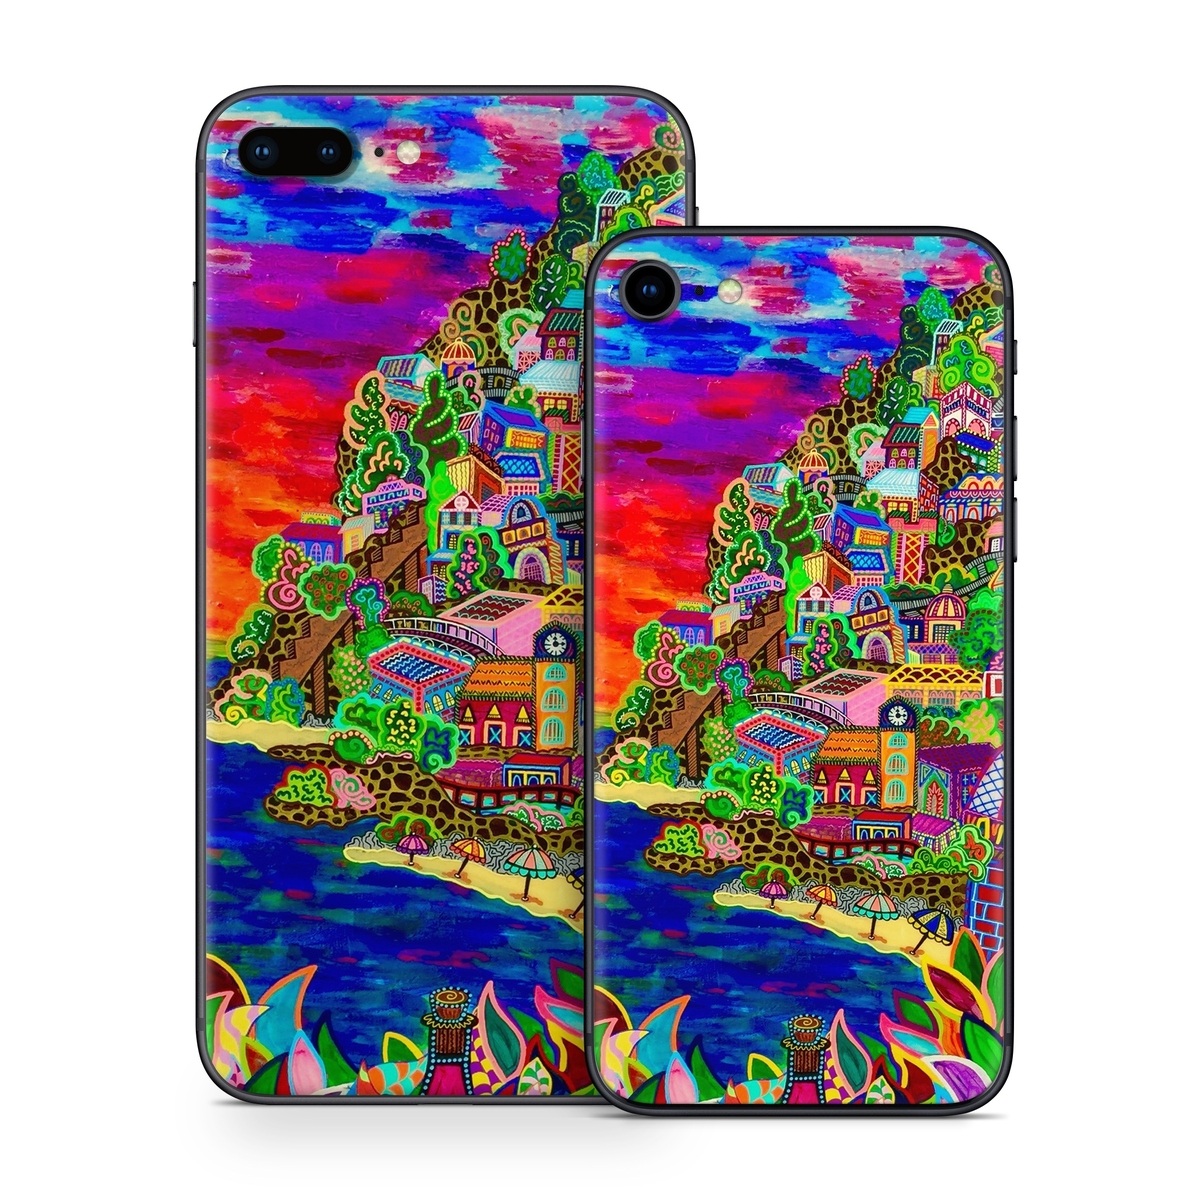 iPhone 8 Series Skin design of Art, Modern art, Visual arts, Painting, with red, blue, yellow, purple, white, green, orange colors